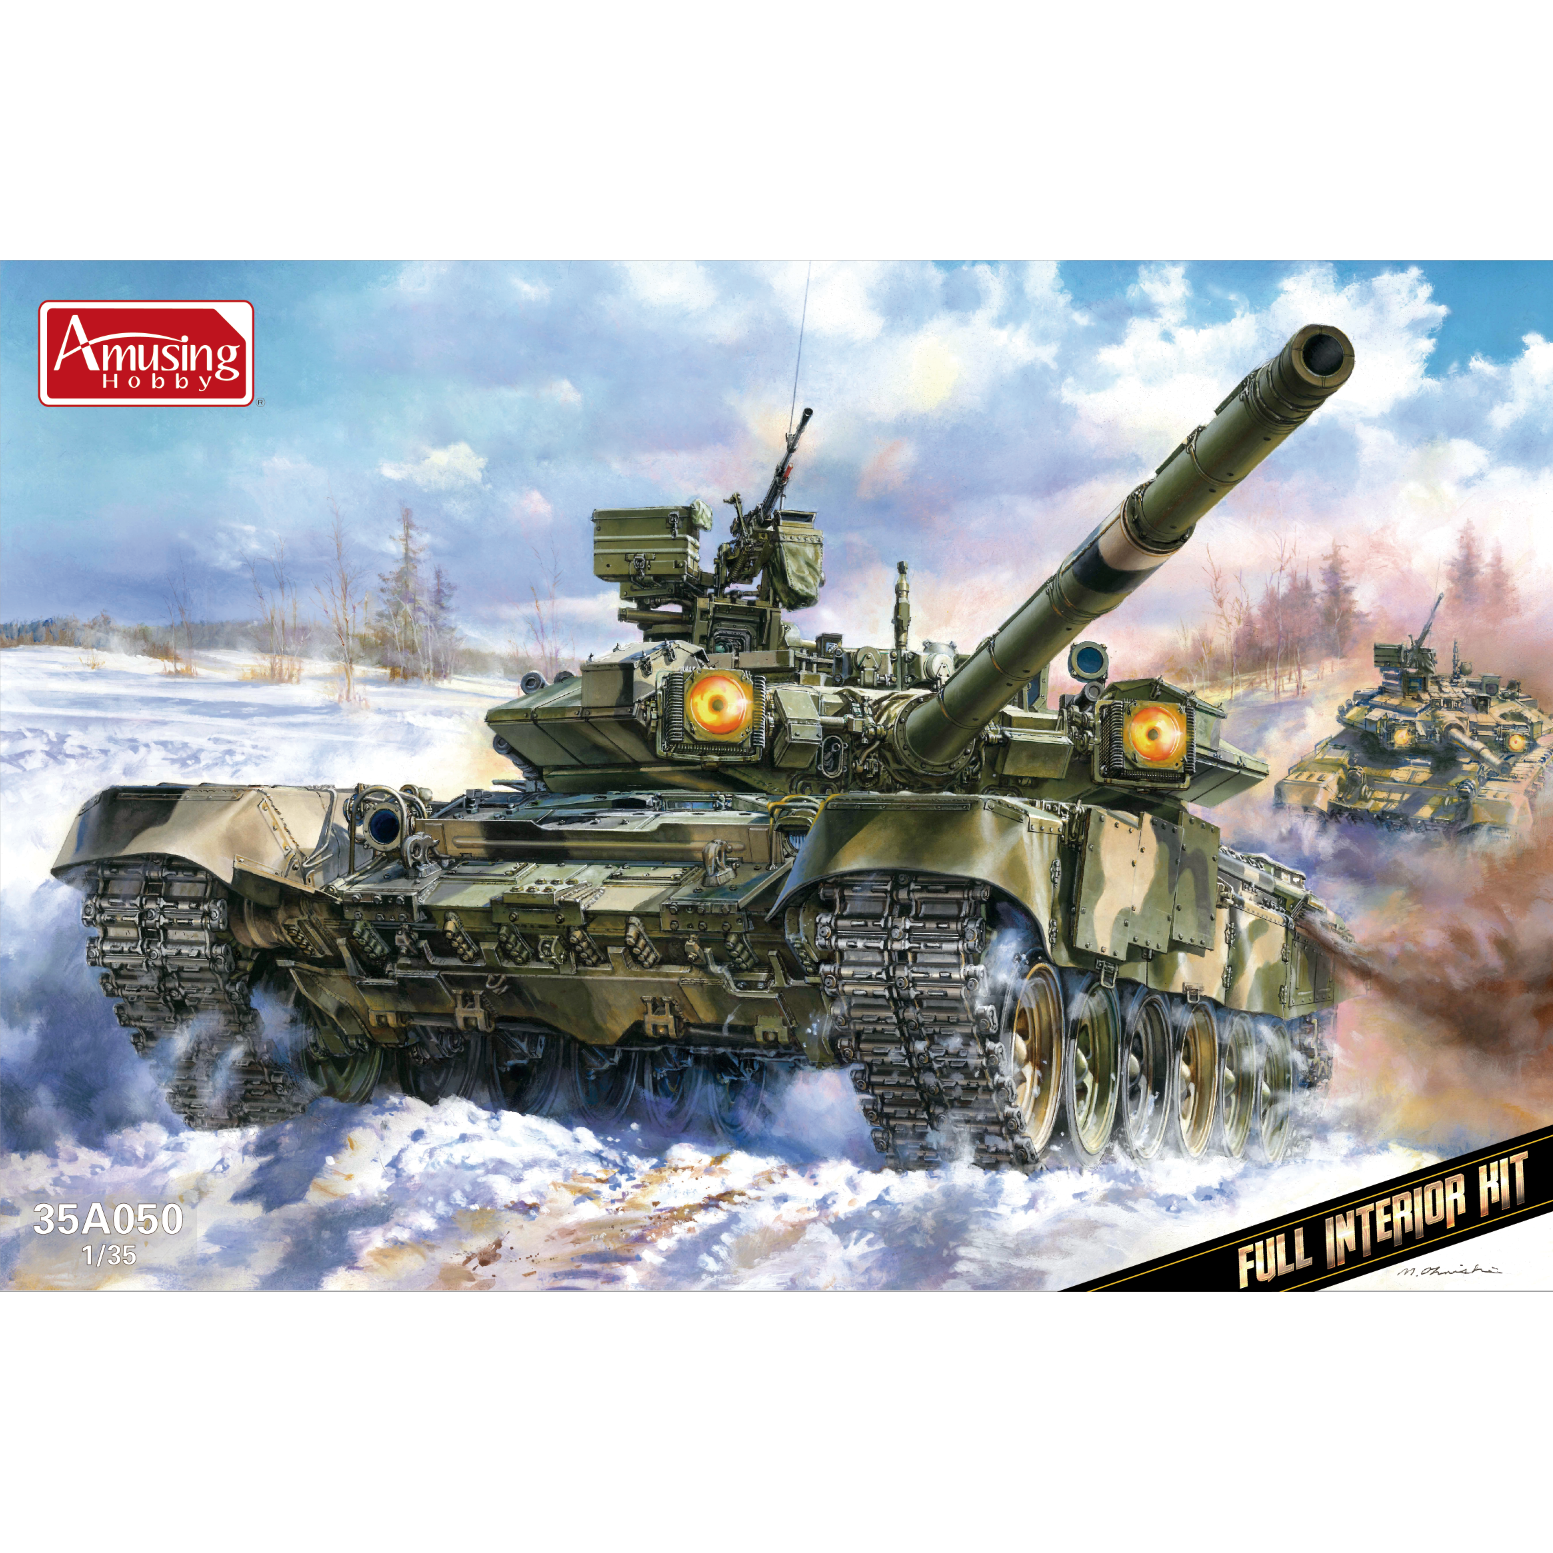 35A050 Amusing Hobby 1/35 Russian Tank 90 with Full Interior